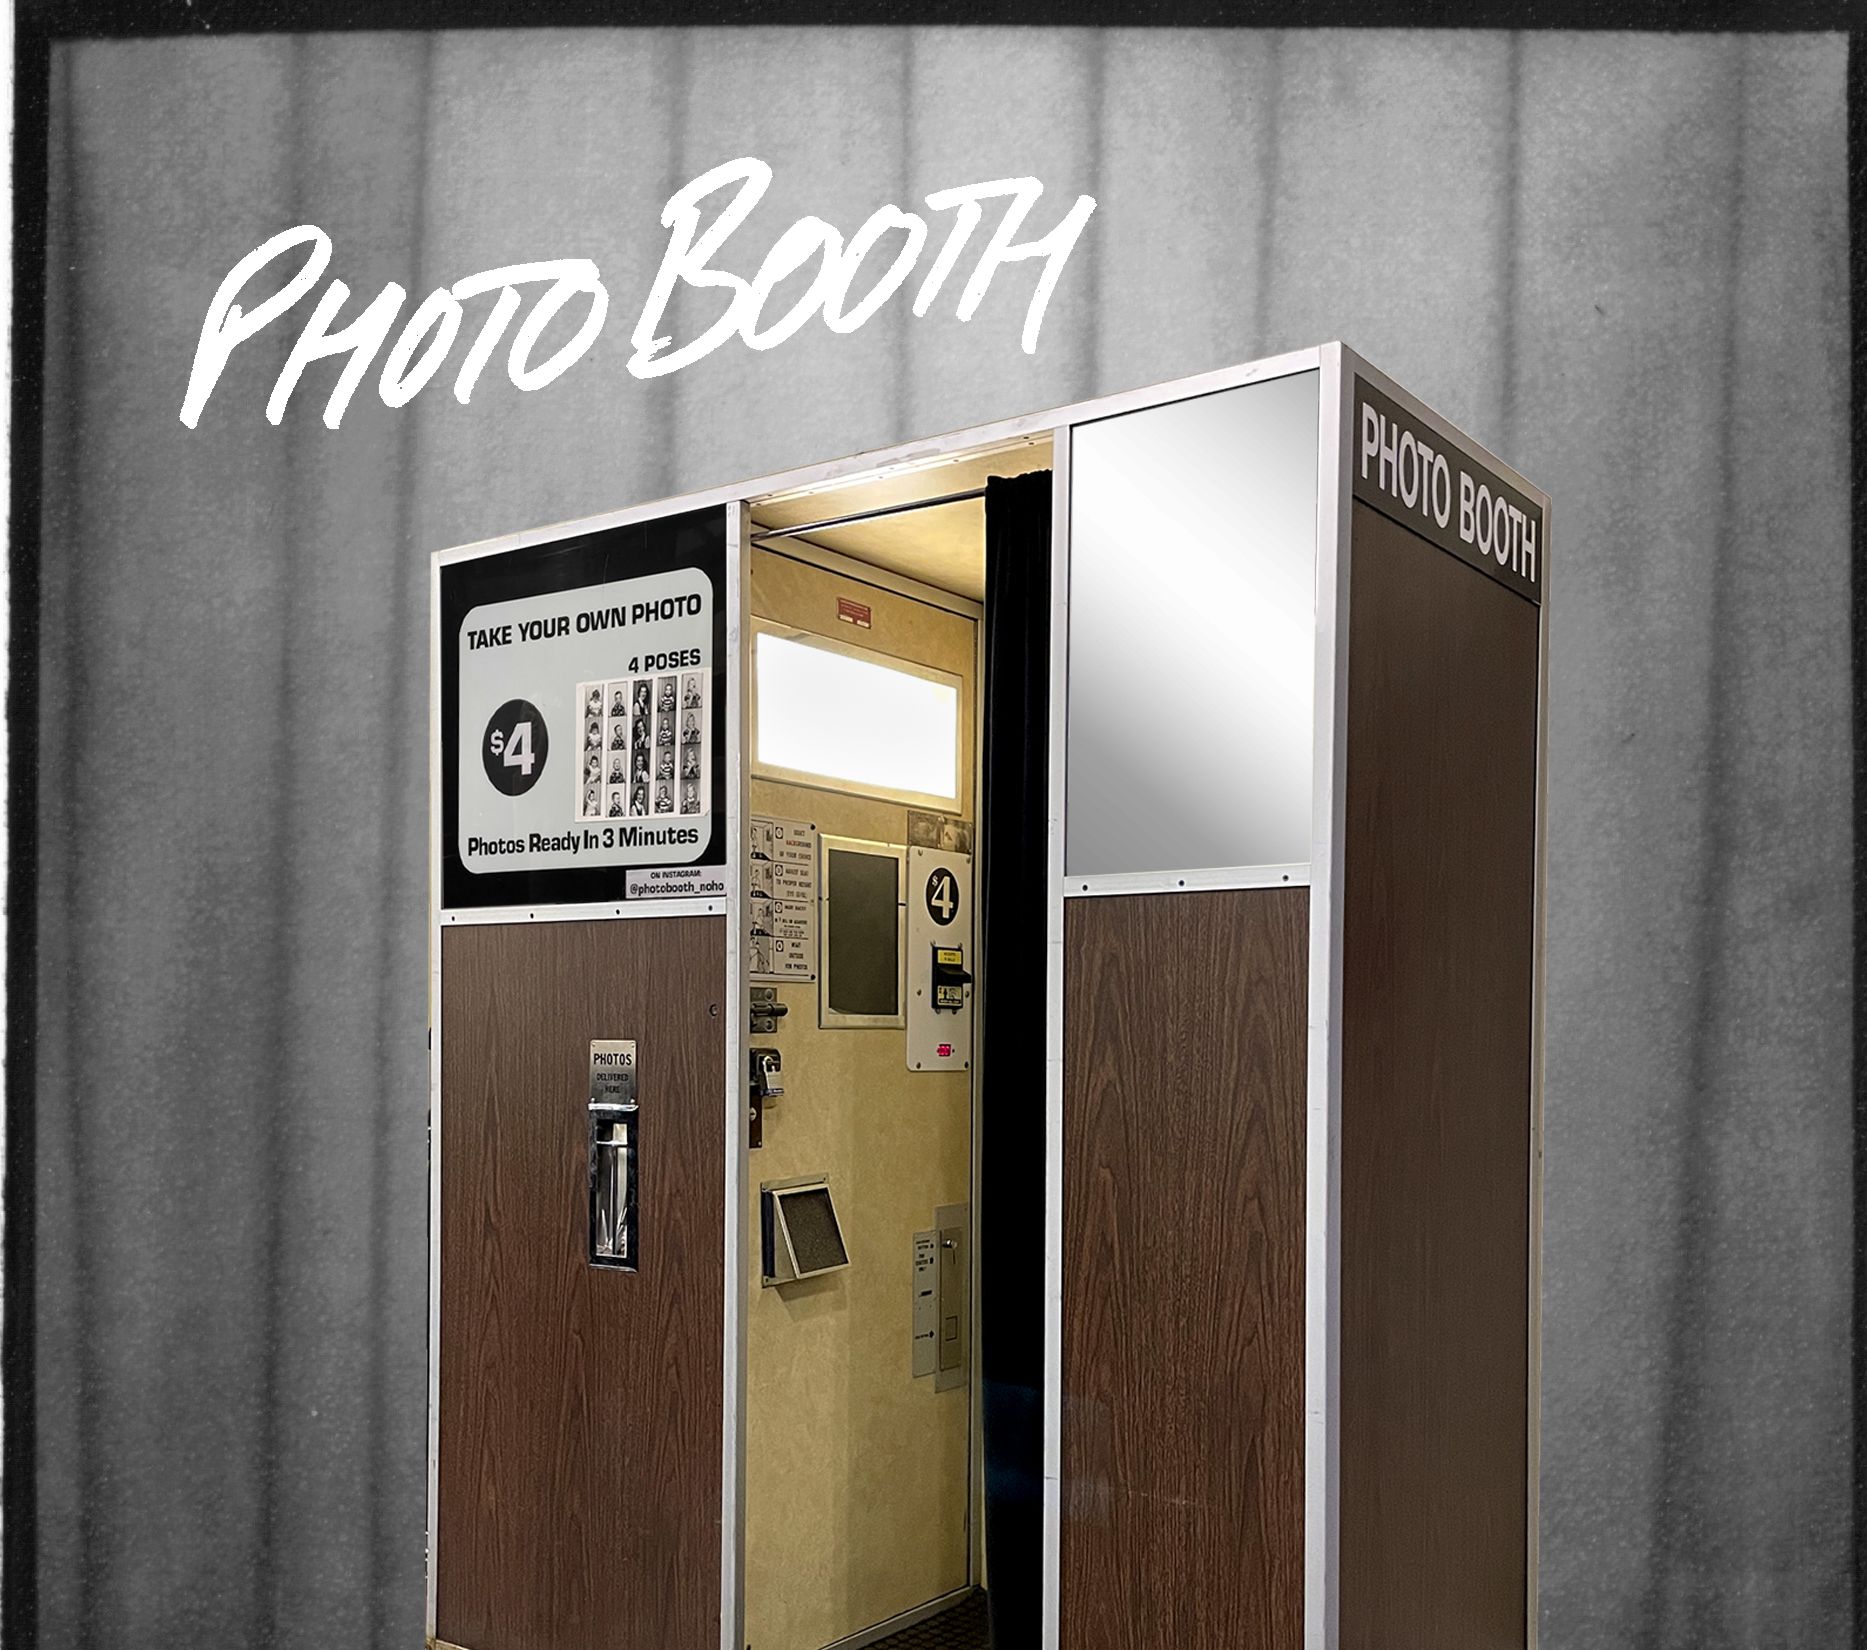 Photobooth Northampton in Thornes Marketplace Northampton MA is your go-to spot for taking old school pics!